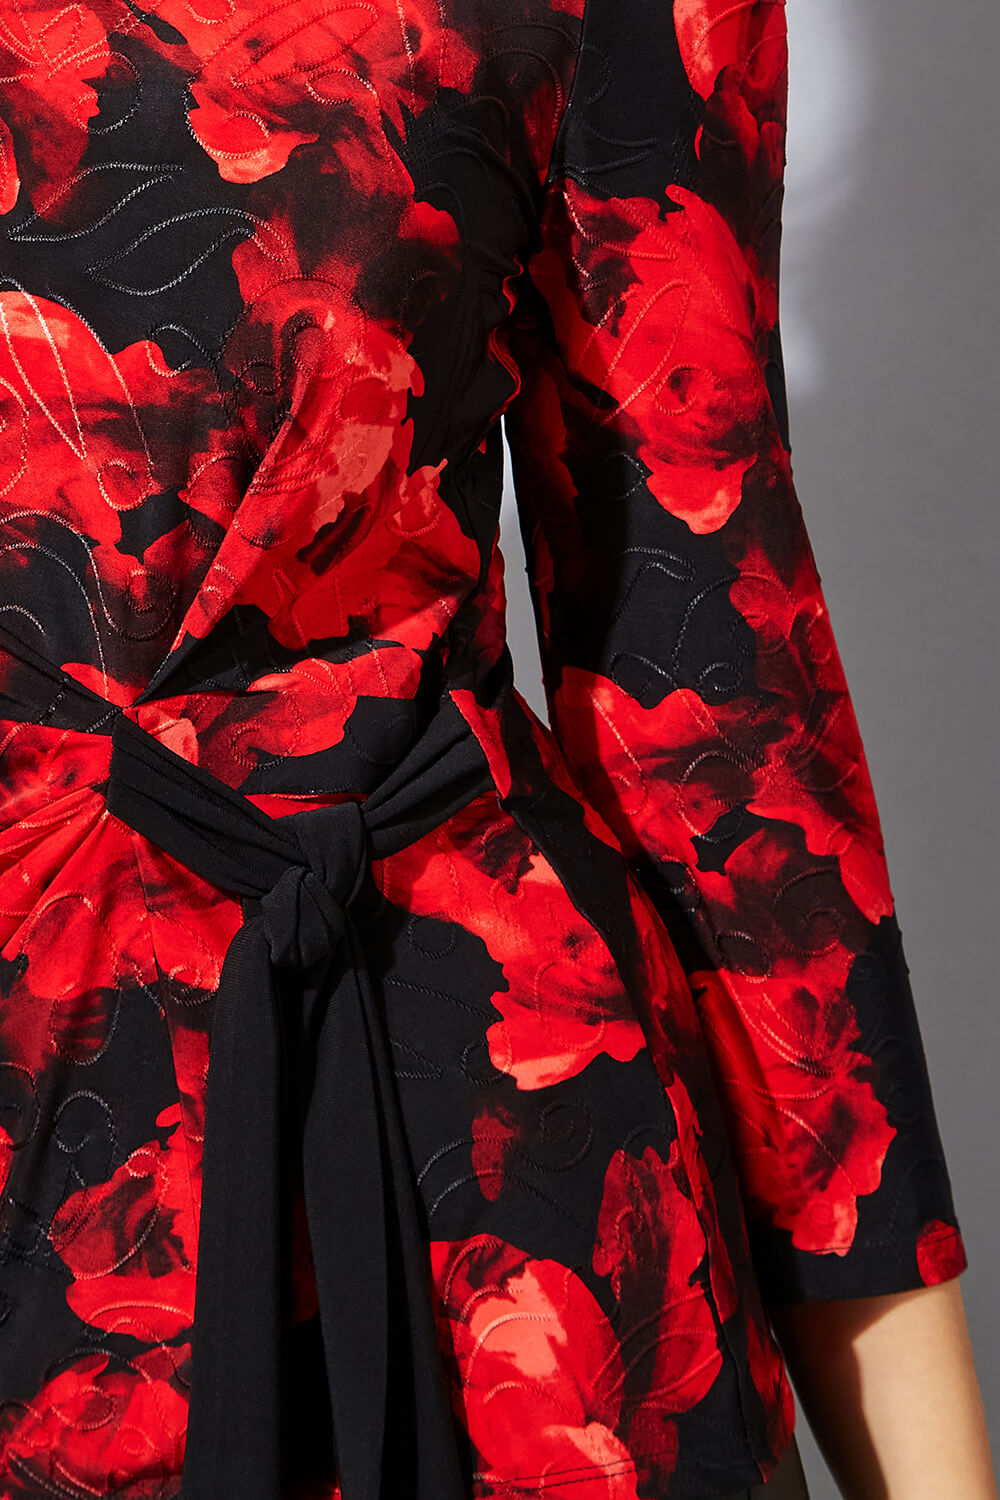 Red Jacquard Floral Side Tie Top, Image 5 of 6